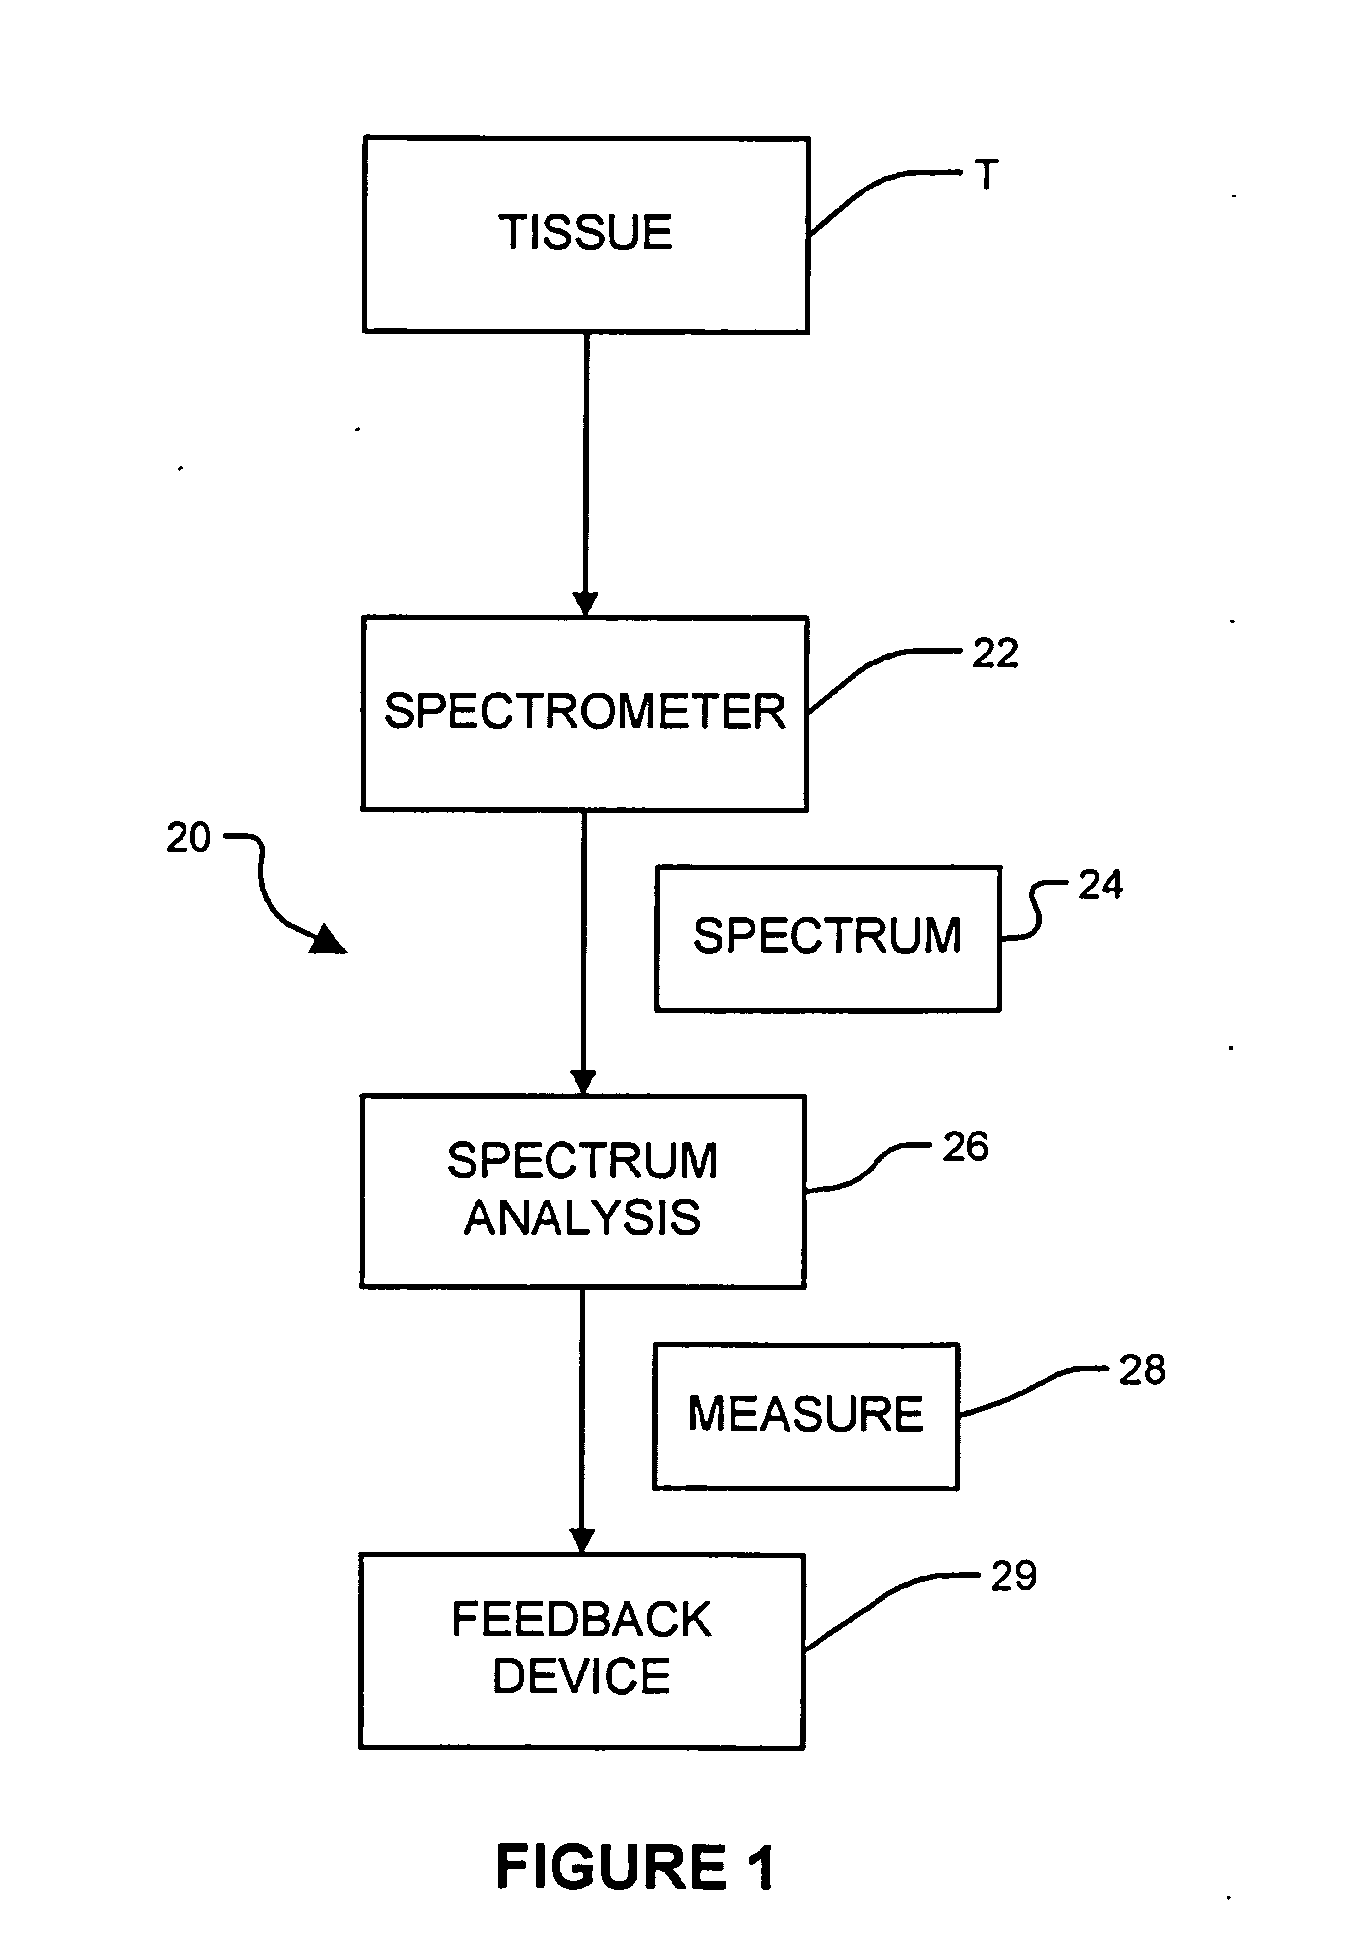 Apparatus and methods for characterization of lung tissue by raman spectroscopy